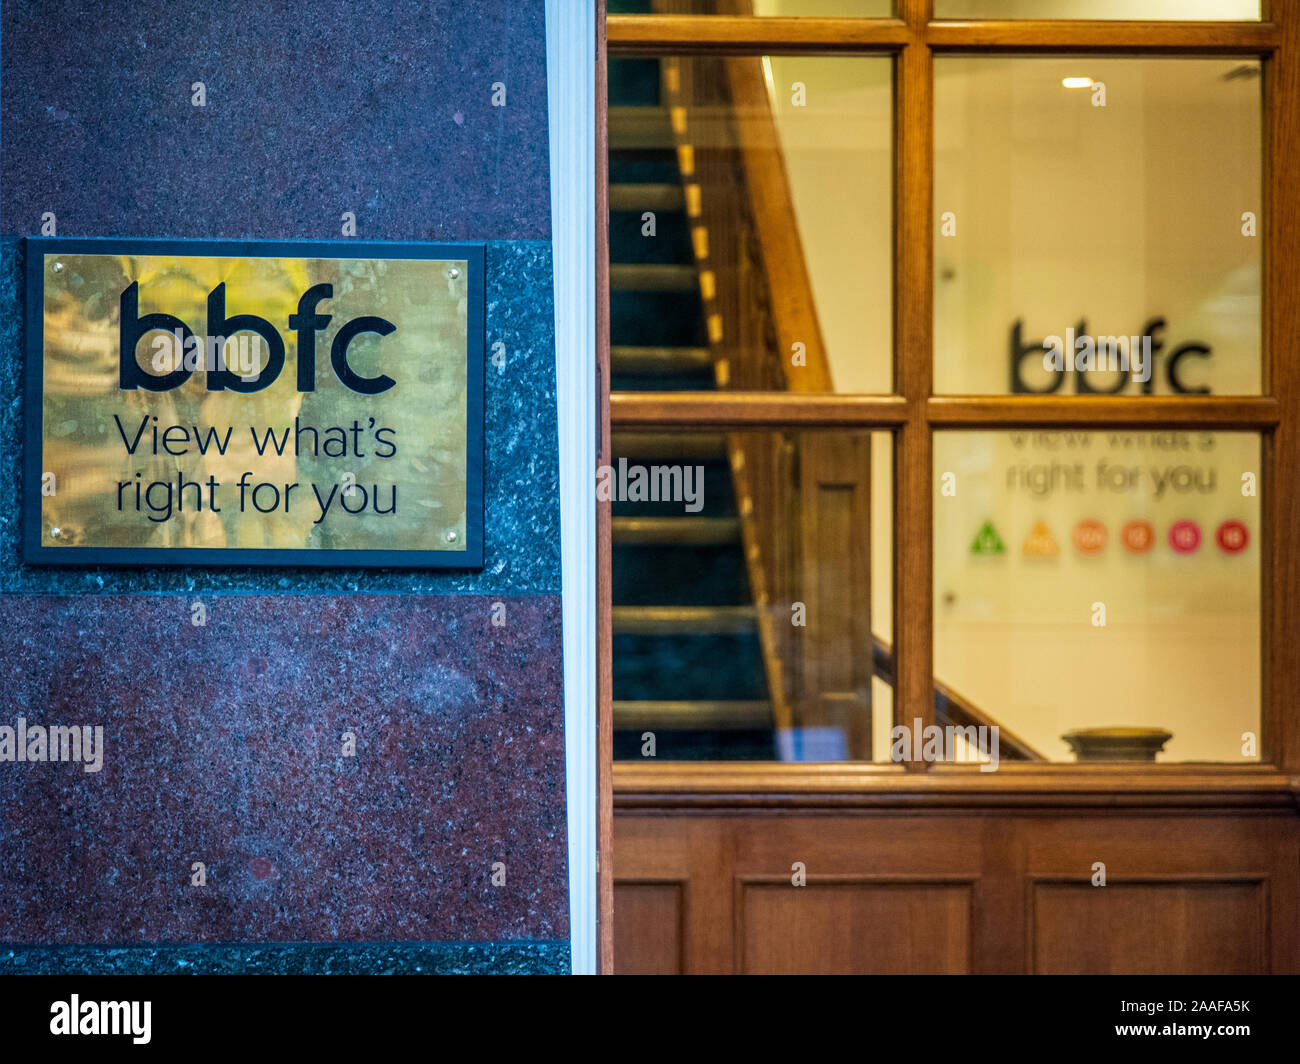 BBFC offices Soho London. The BBFC British Board of Film Classification offices on Soho Square in Central London. Stock Photo